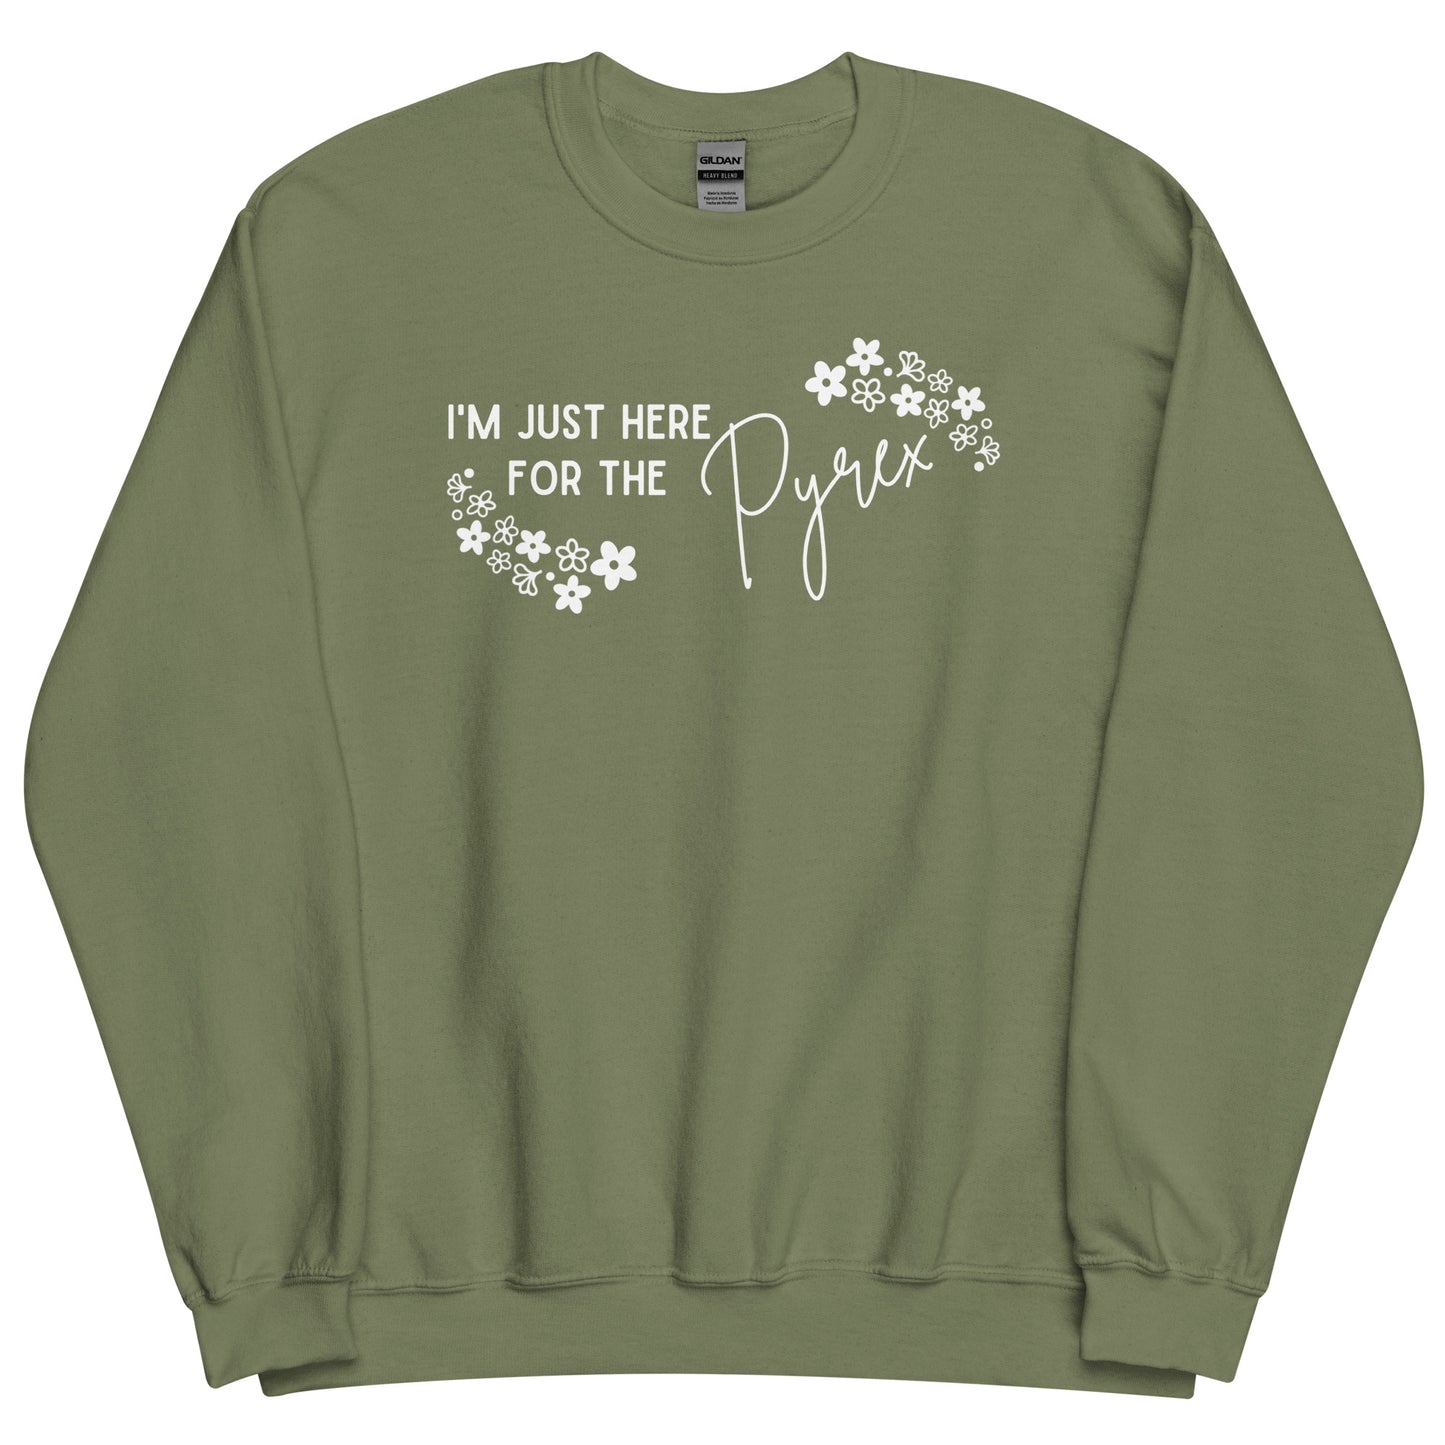 I'm Just Here for the Pyrex - Unisex Sweatshirt